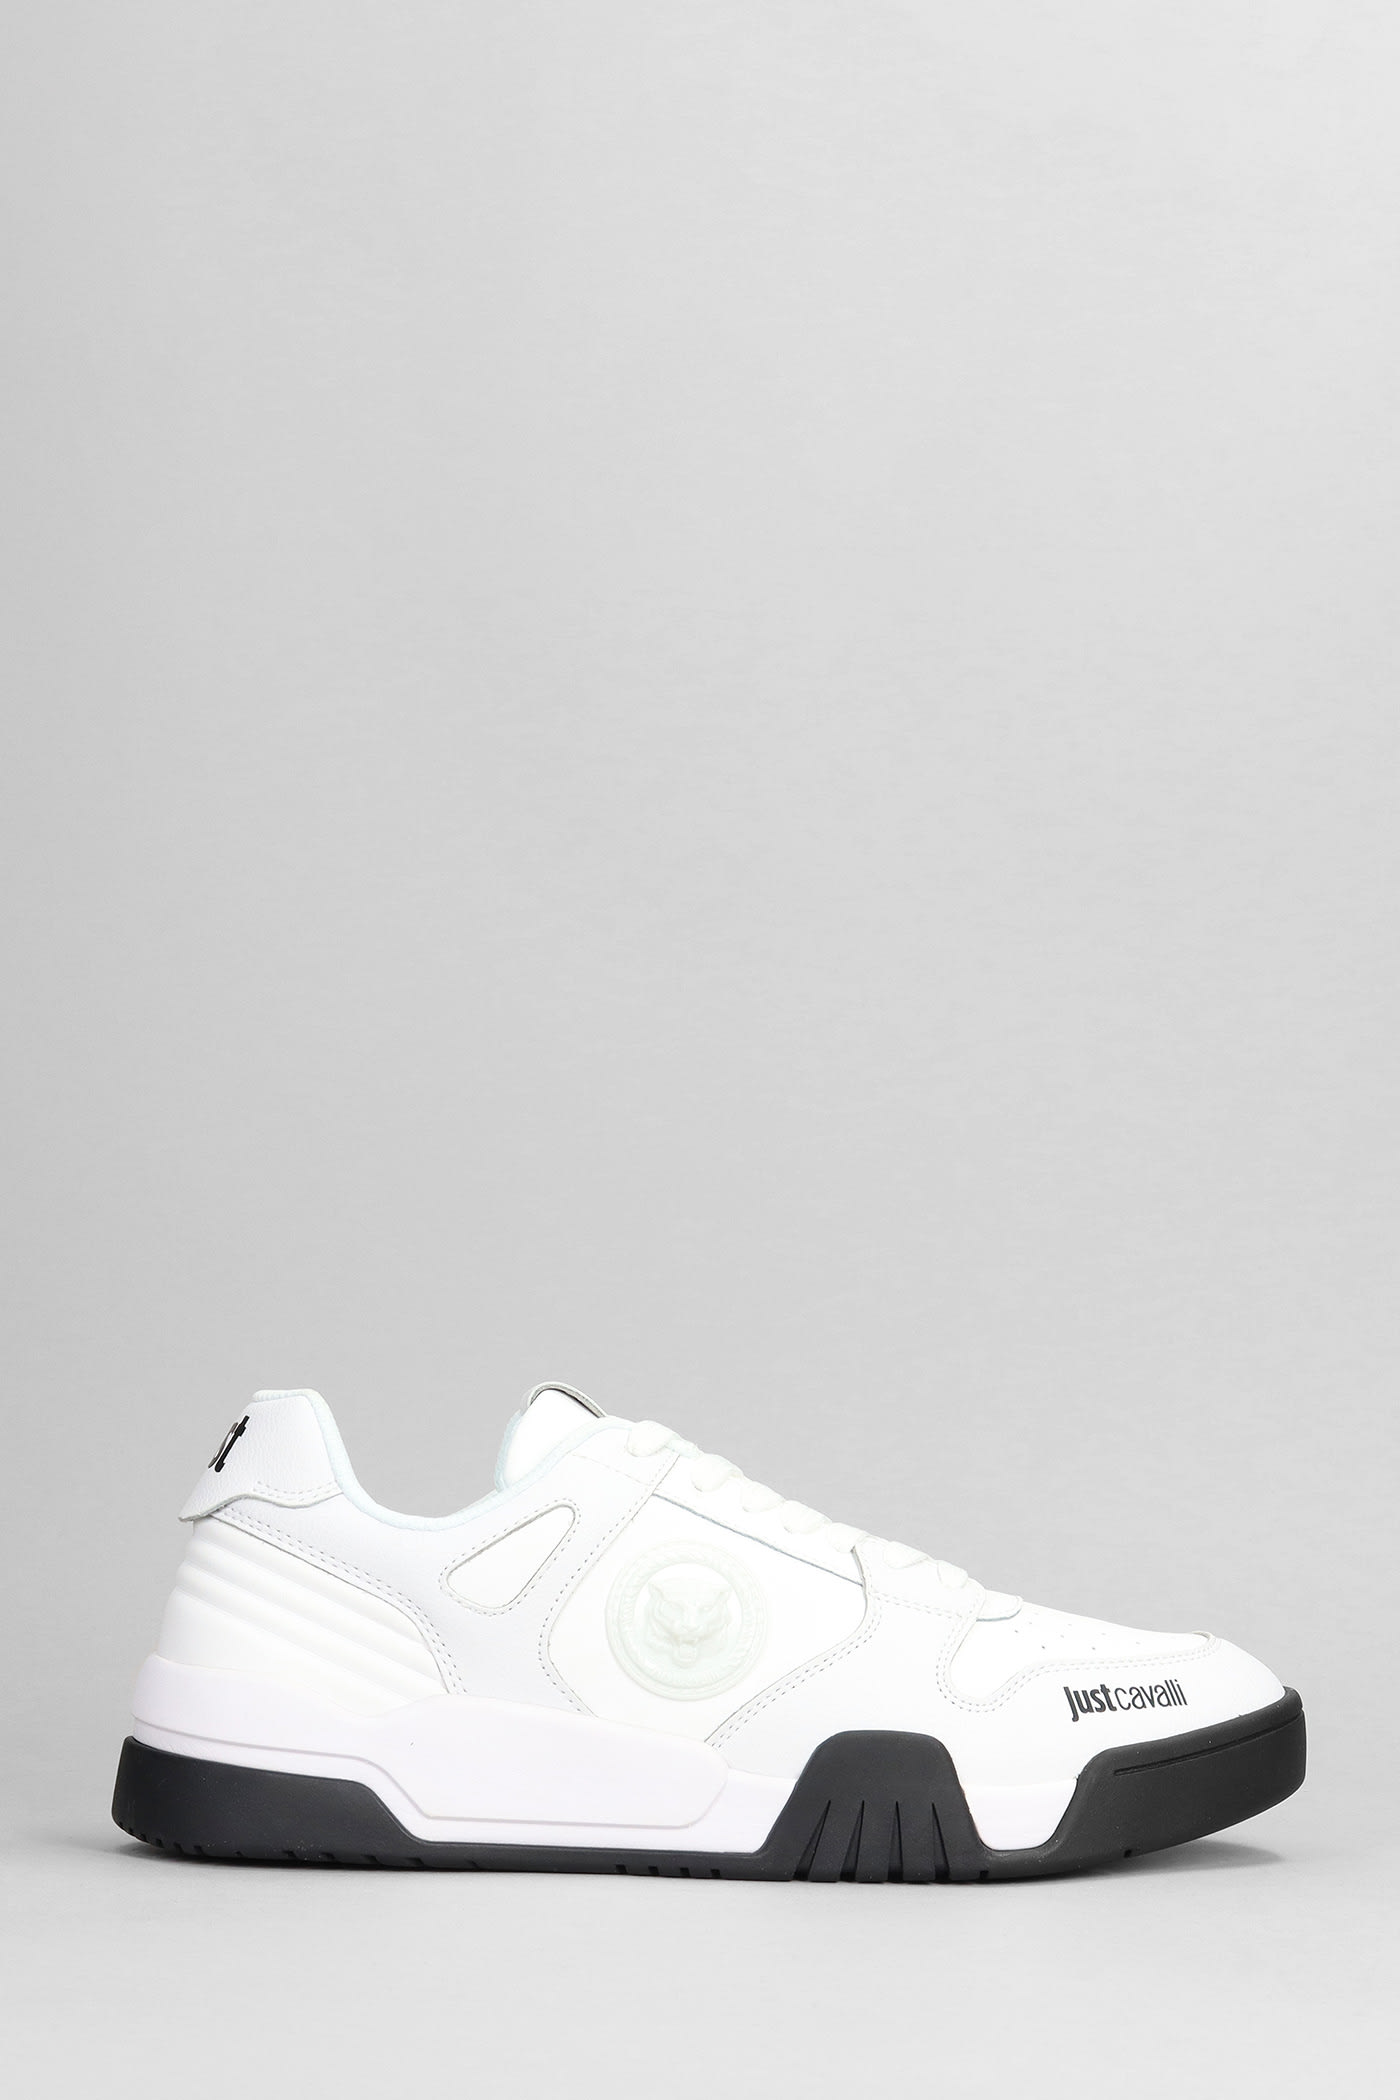 JUST CAVALLI SNEAKERS IN WHITE LEATHER